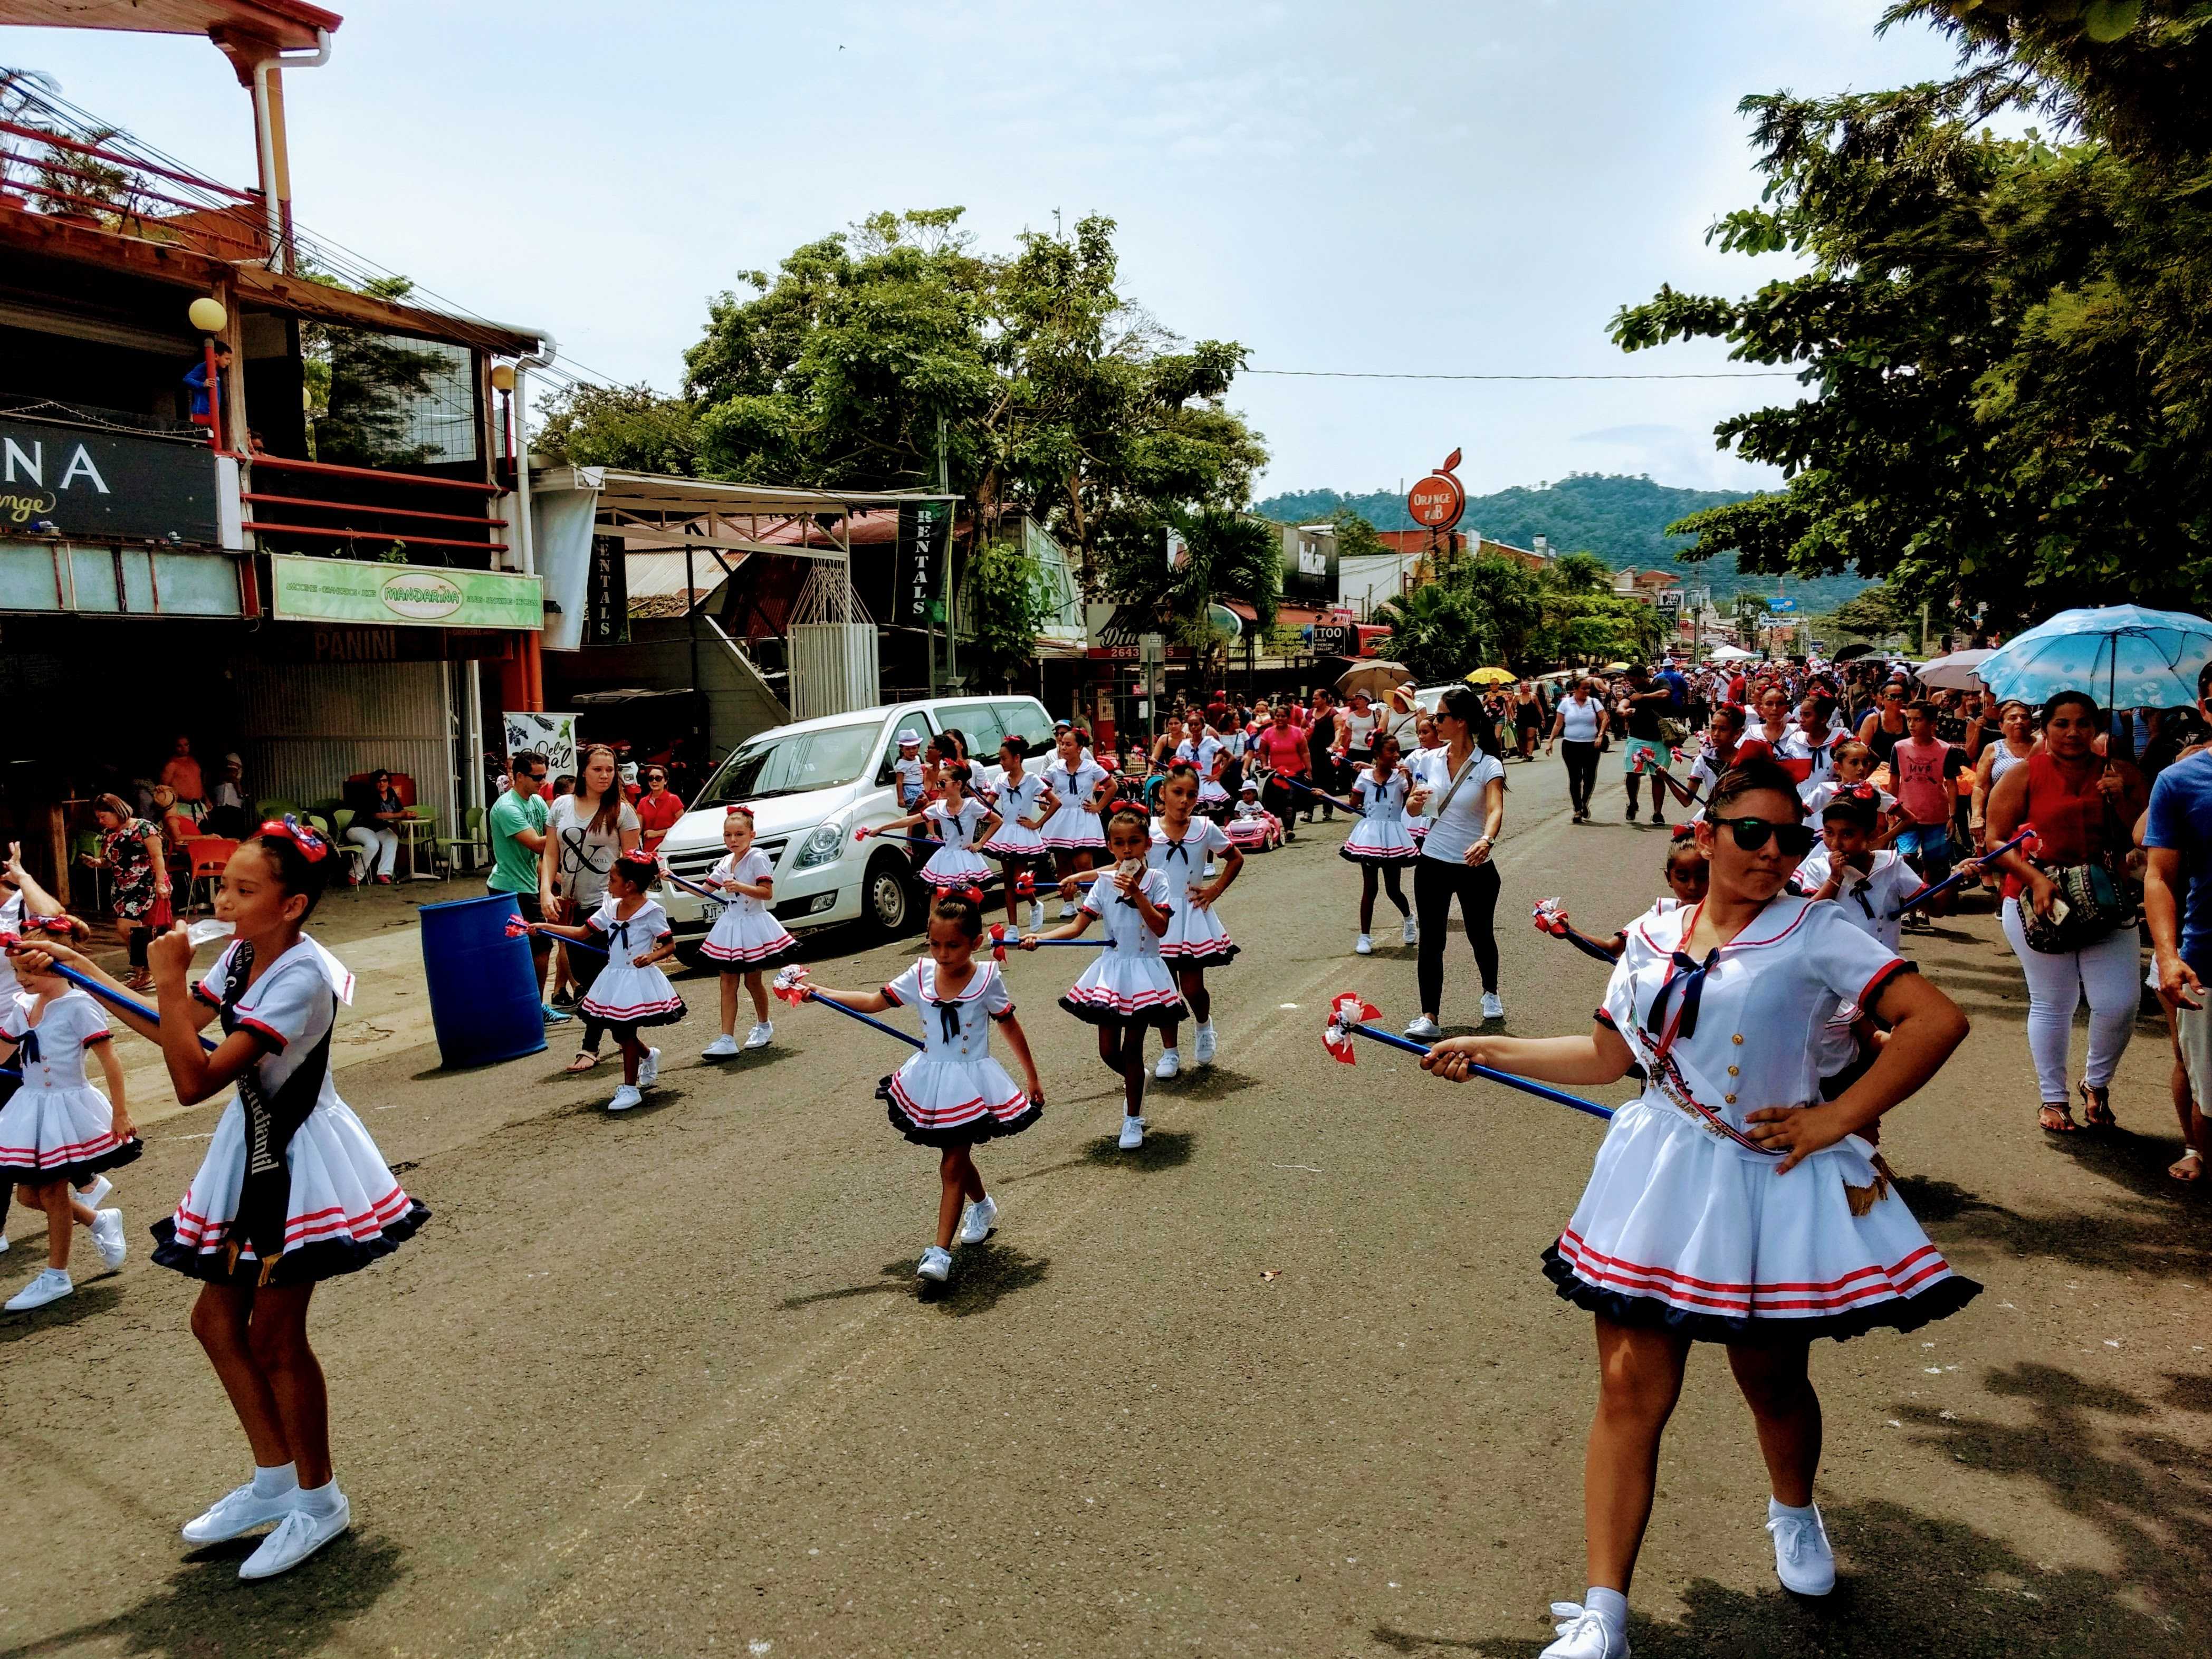 Kids marching in a typical Costa Rican parade